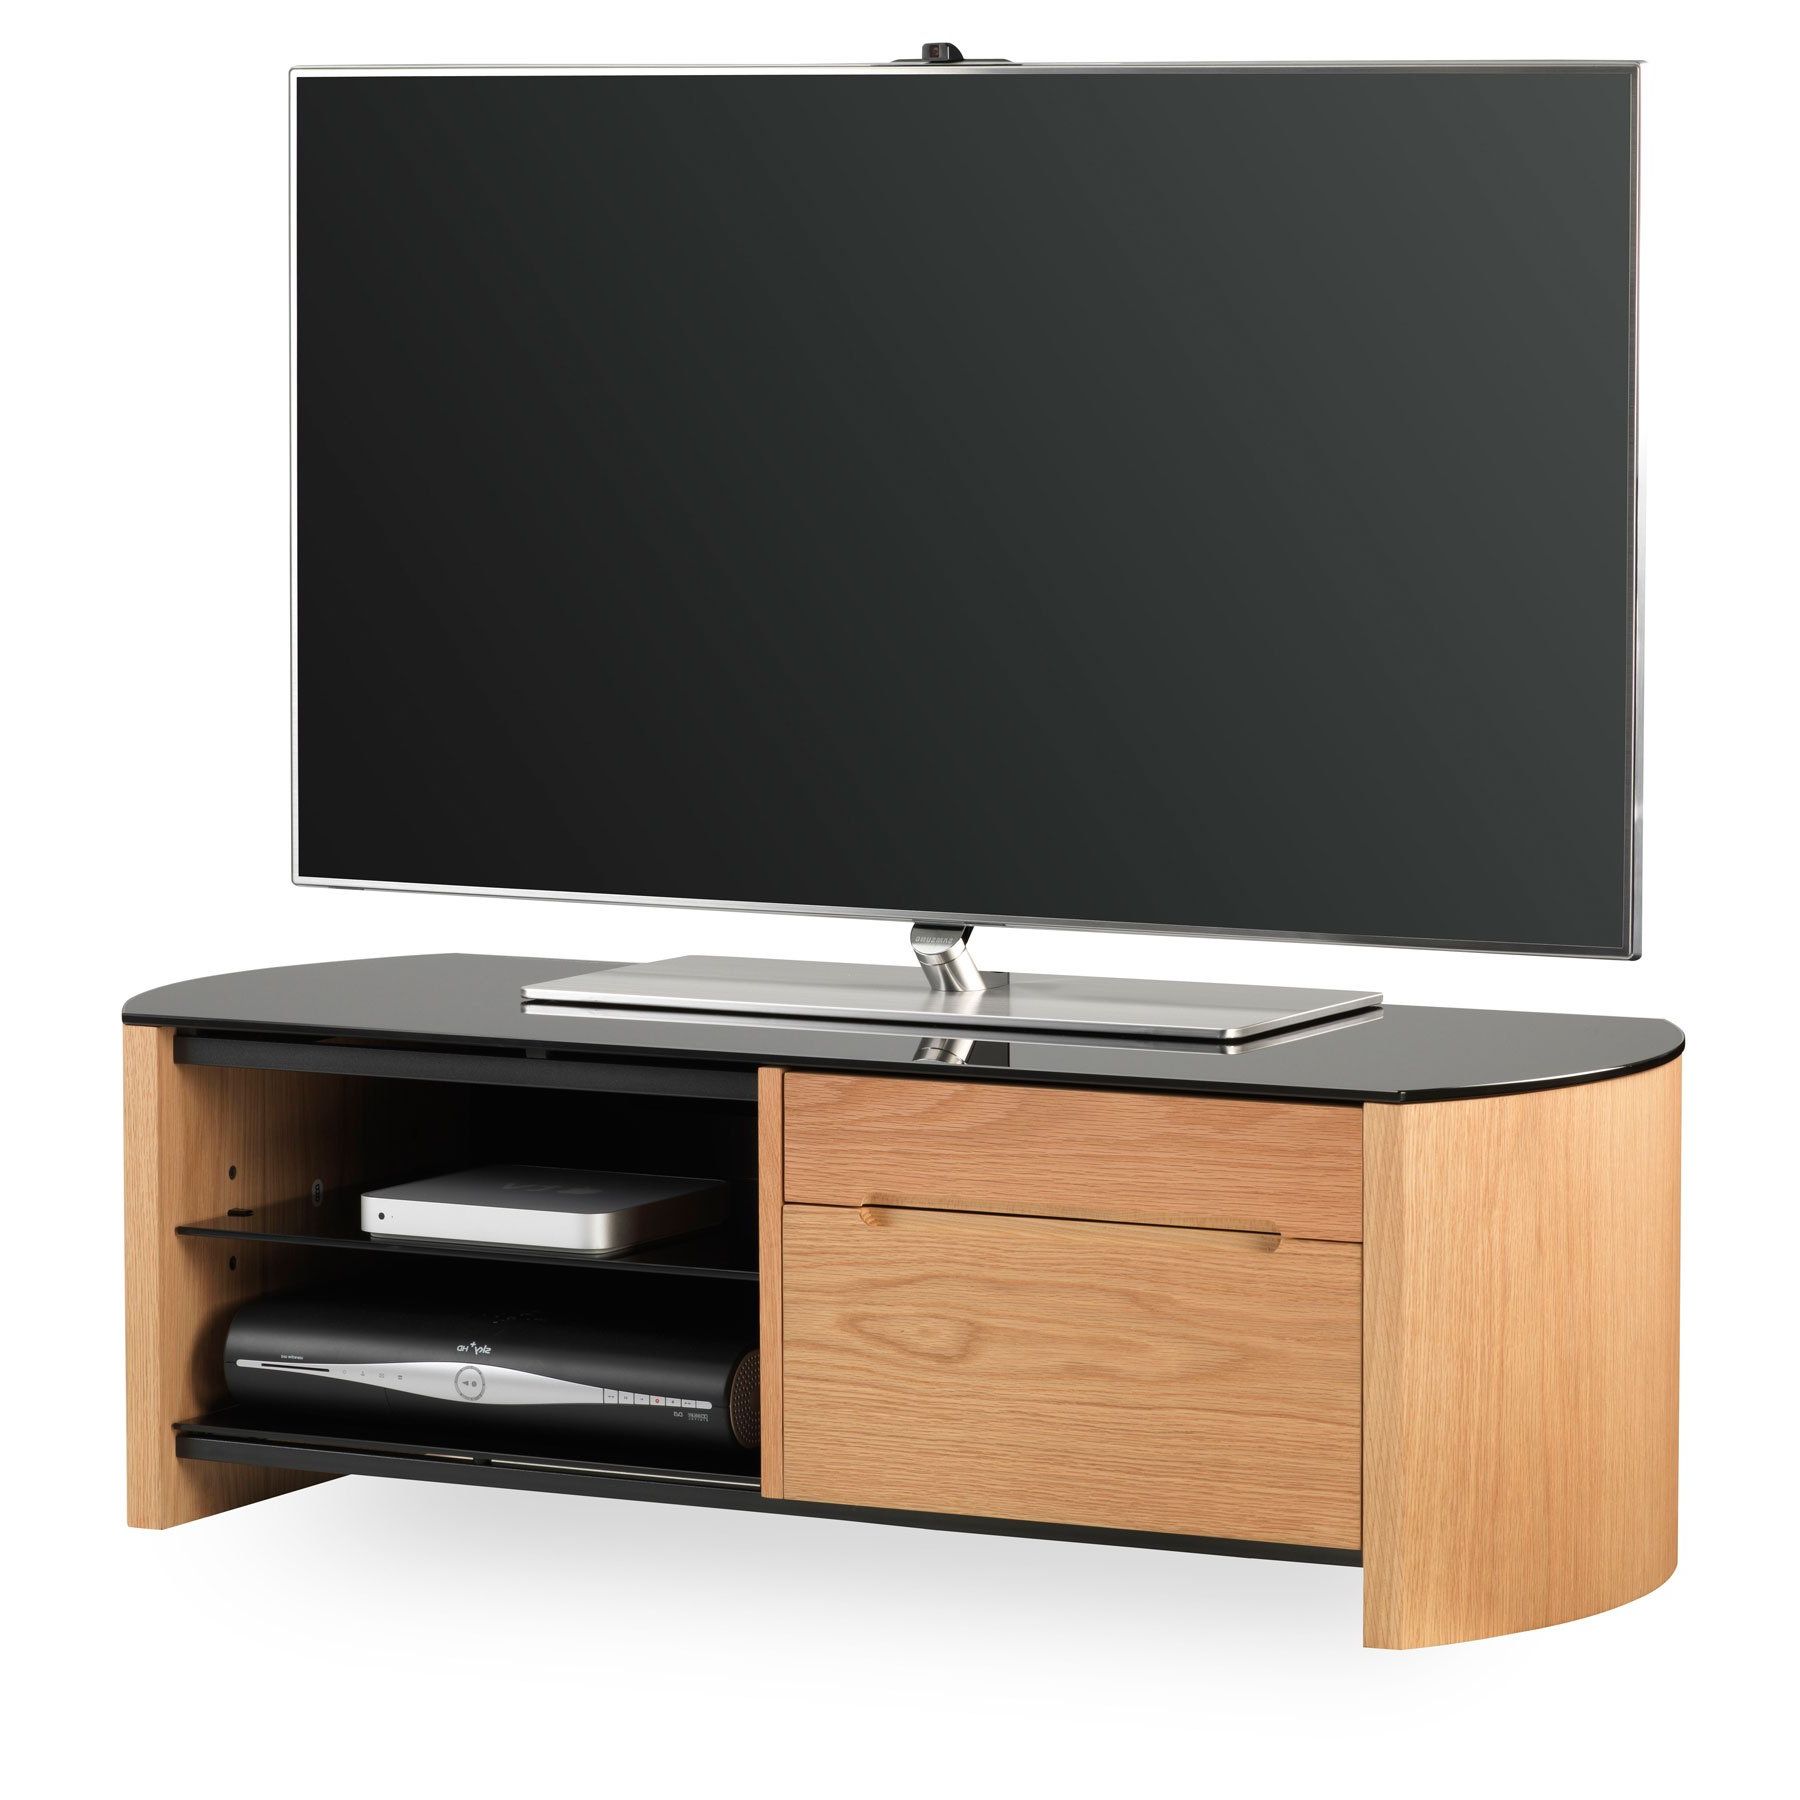 Current Alphason Finewood Fw1100cb Light Oak Tv Stand For Up To 50 Intended For Virginia Tv Stands For Tvs Up To 50" (View 11 of 25)